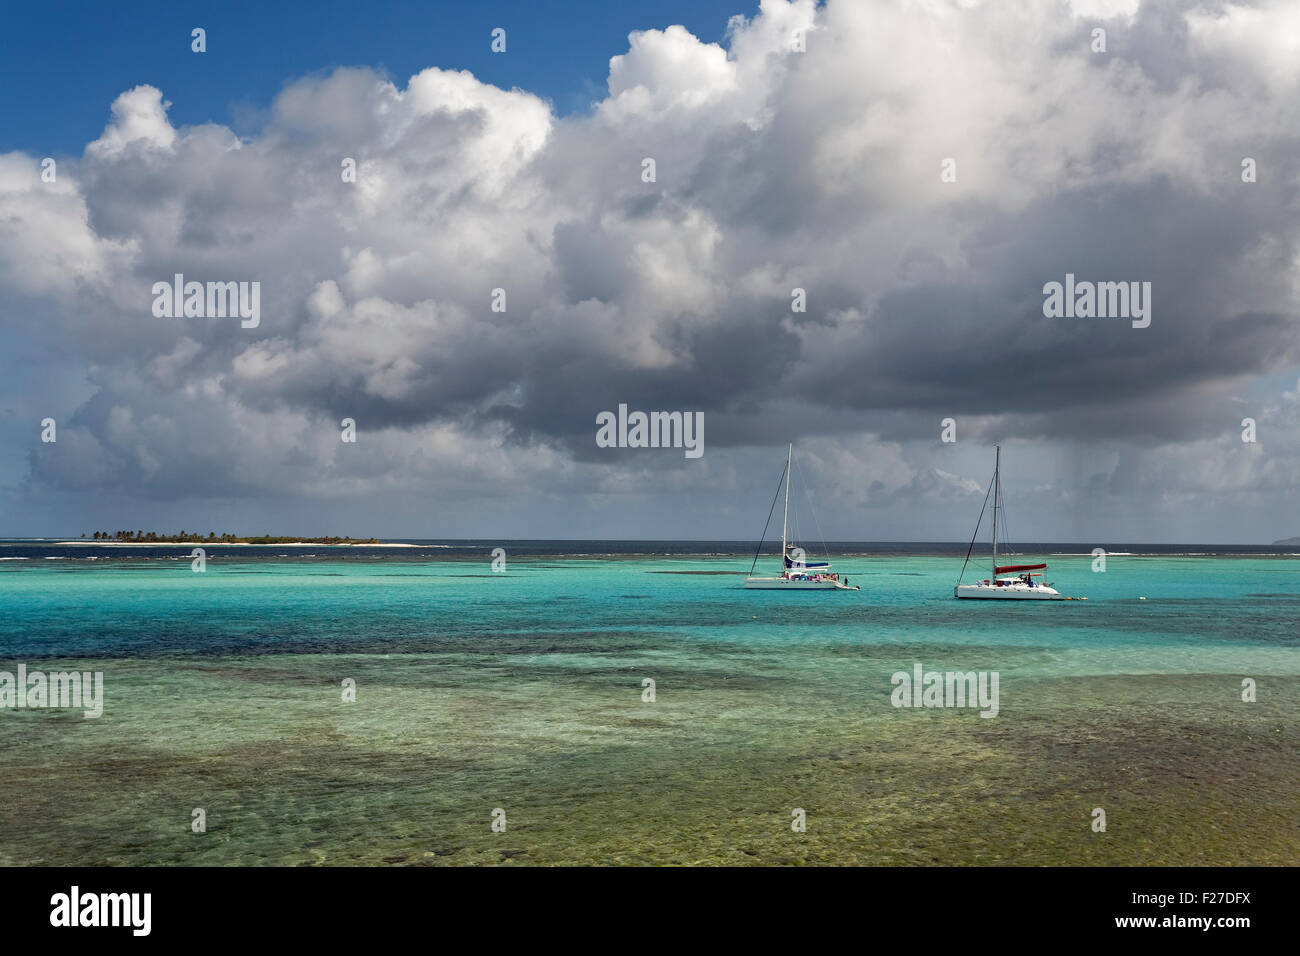 Tobago Cays Marine Park, St. Vincent and the Grenadines, Caribbean Stock Photo